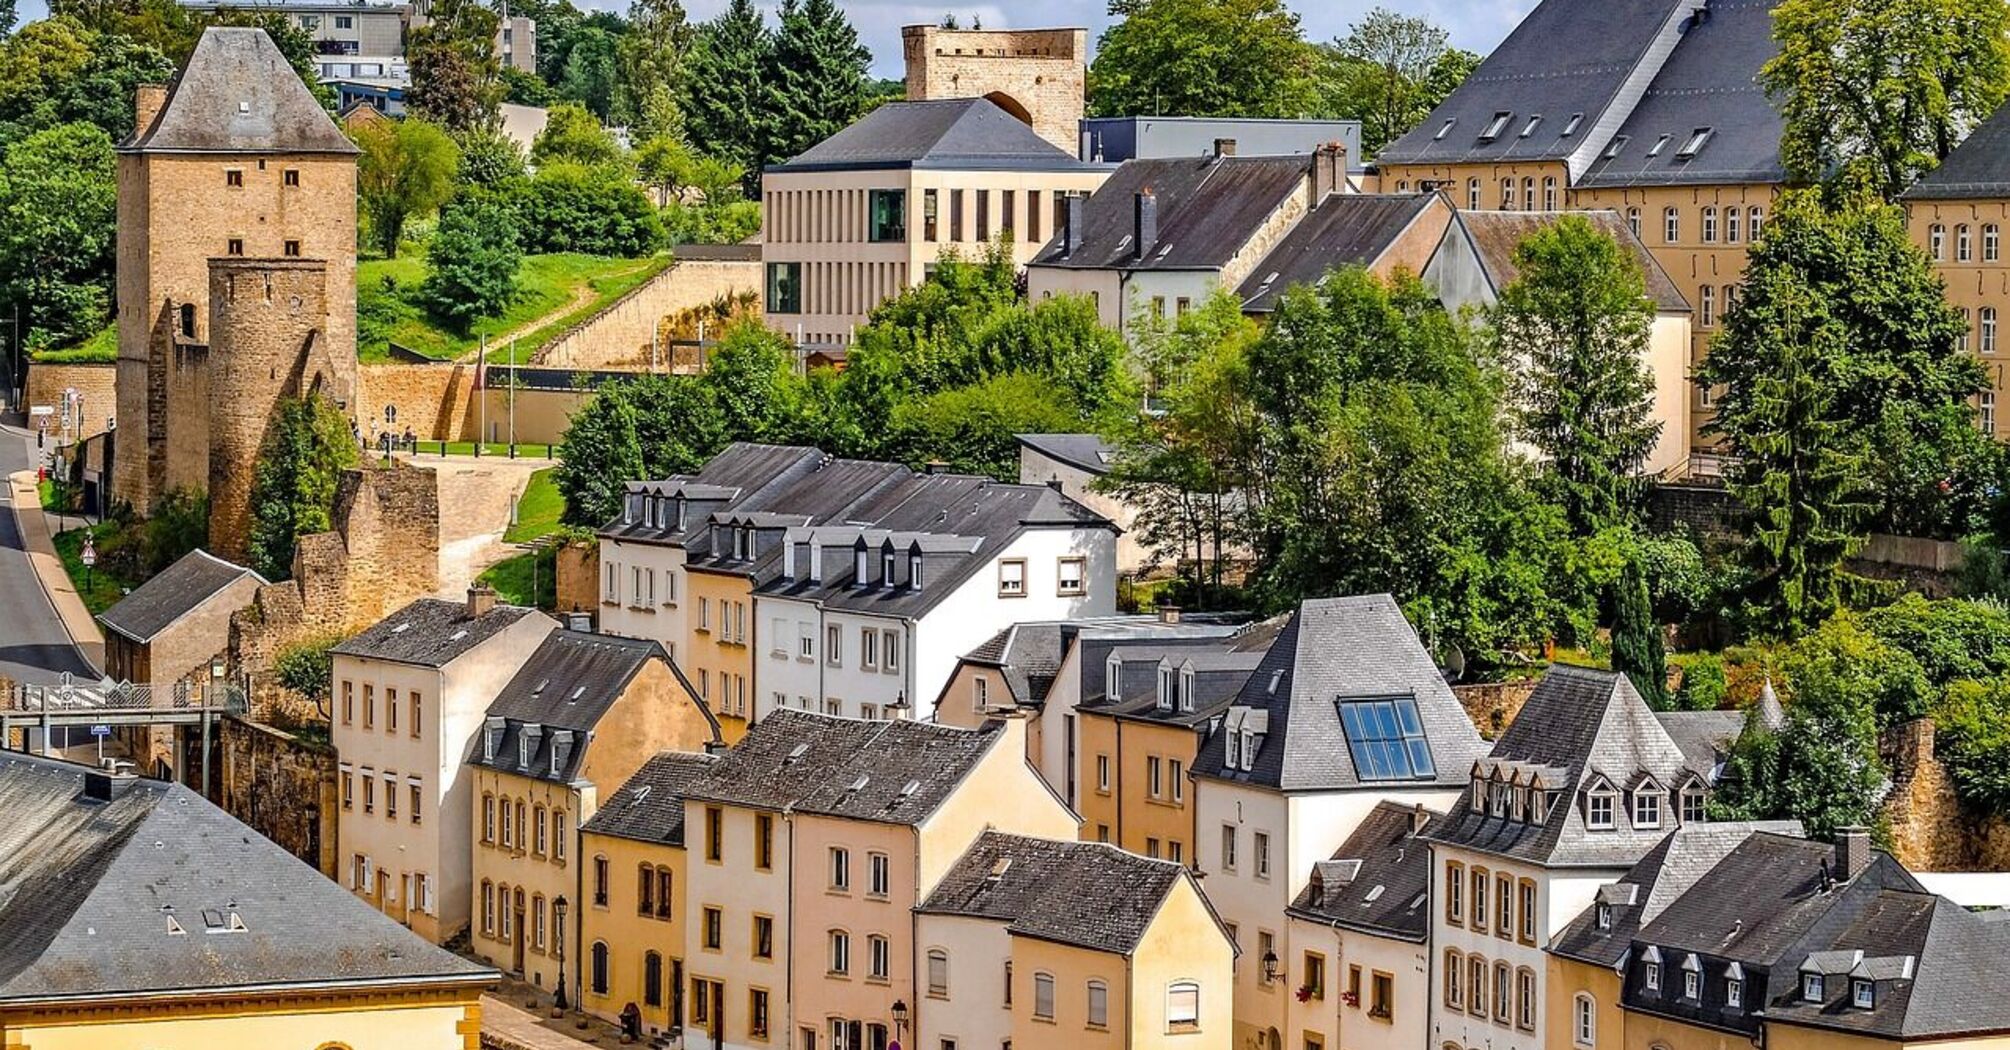 2 ways to make a trip to Luxembourg more environmentally friendly